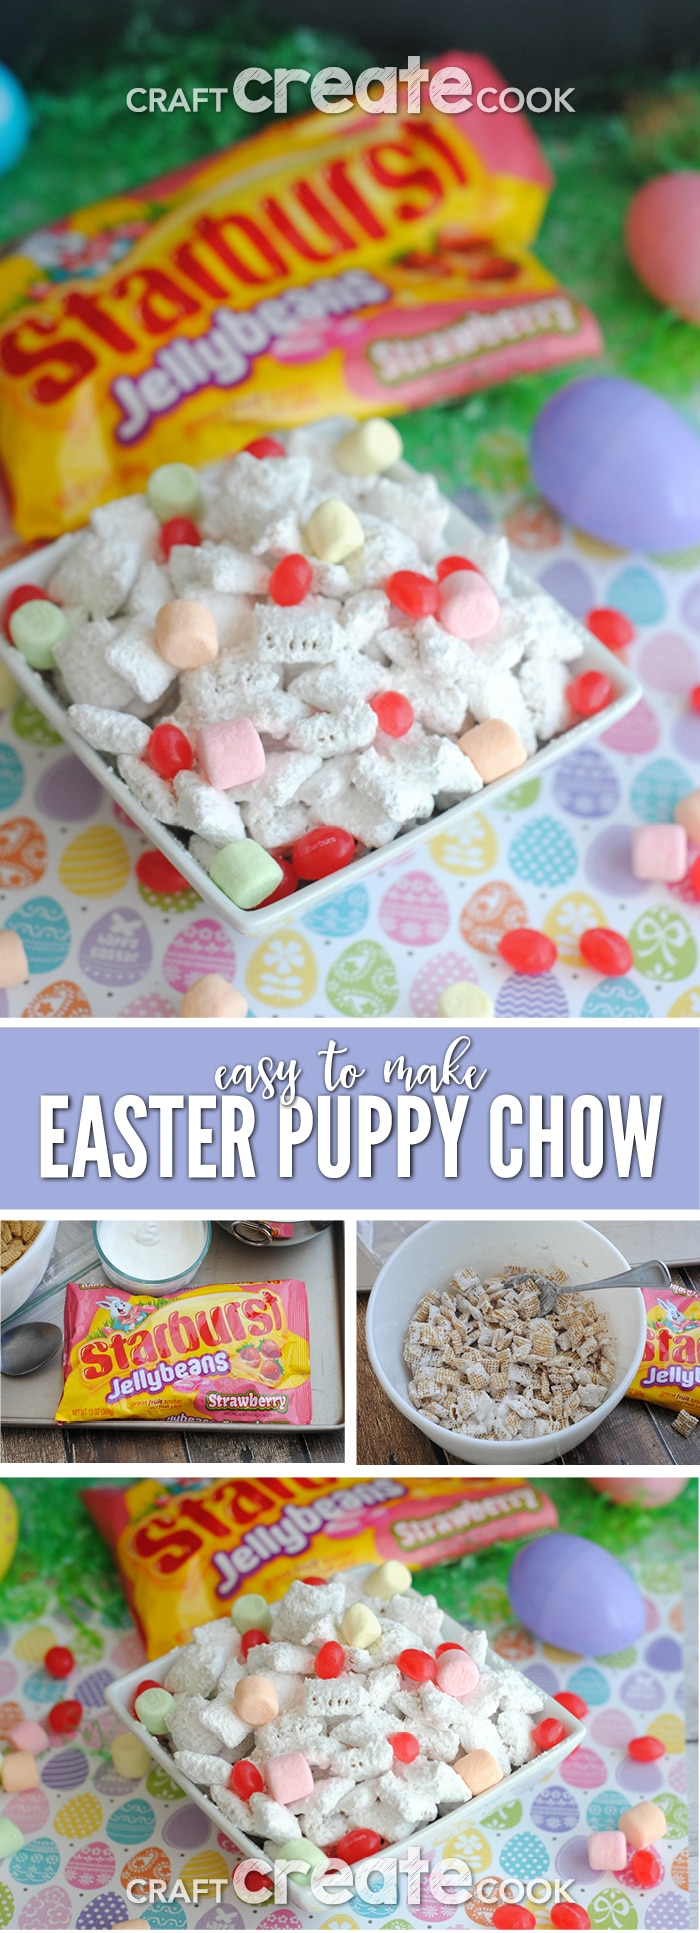 Easter Puppy Chow Recipe - Craft Create Cook